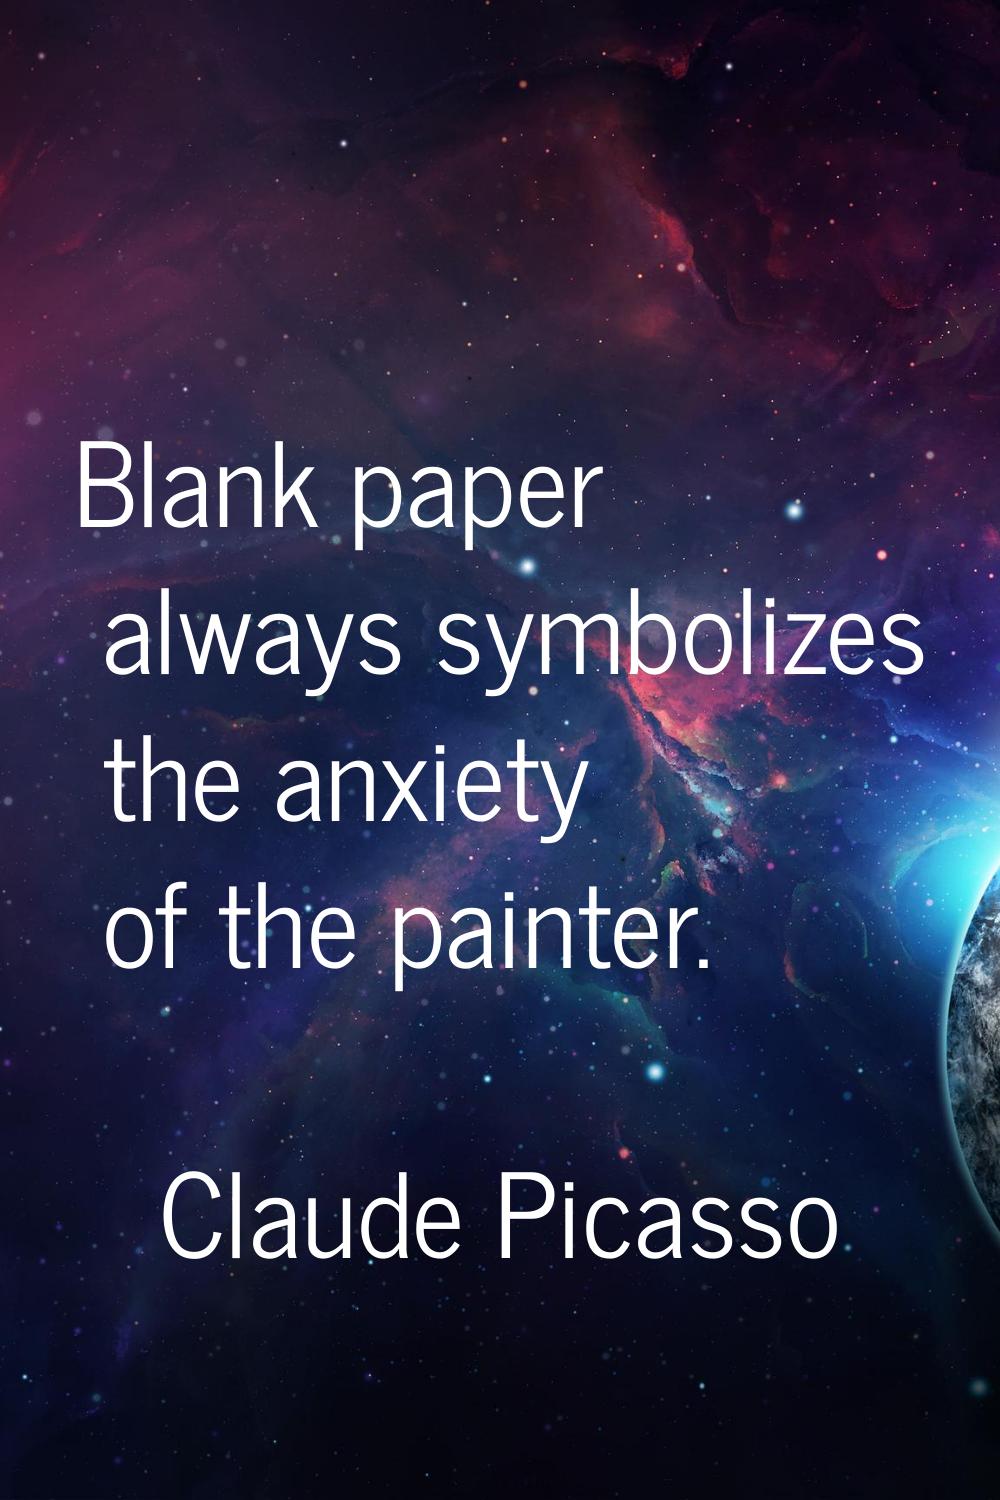 Blank paper always symbolizes the anxiety of the painter.